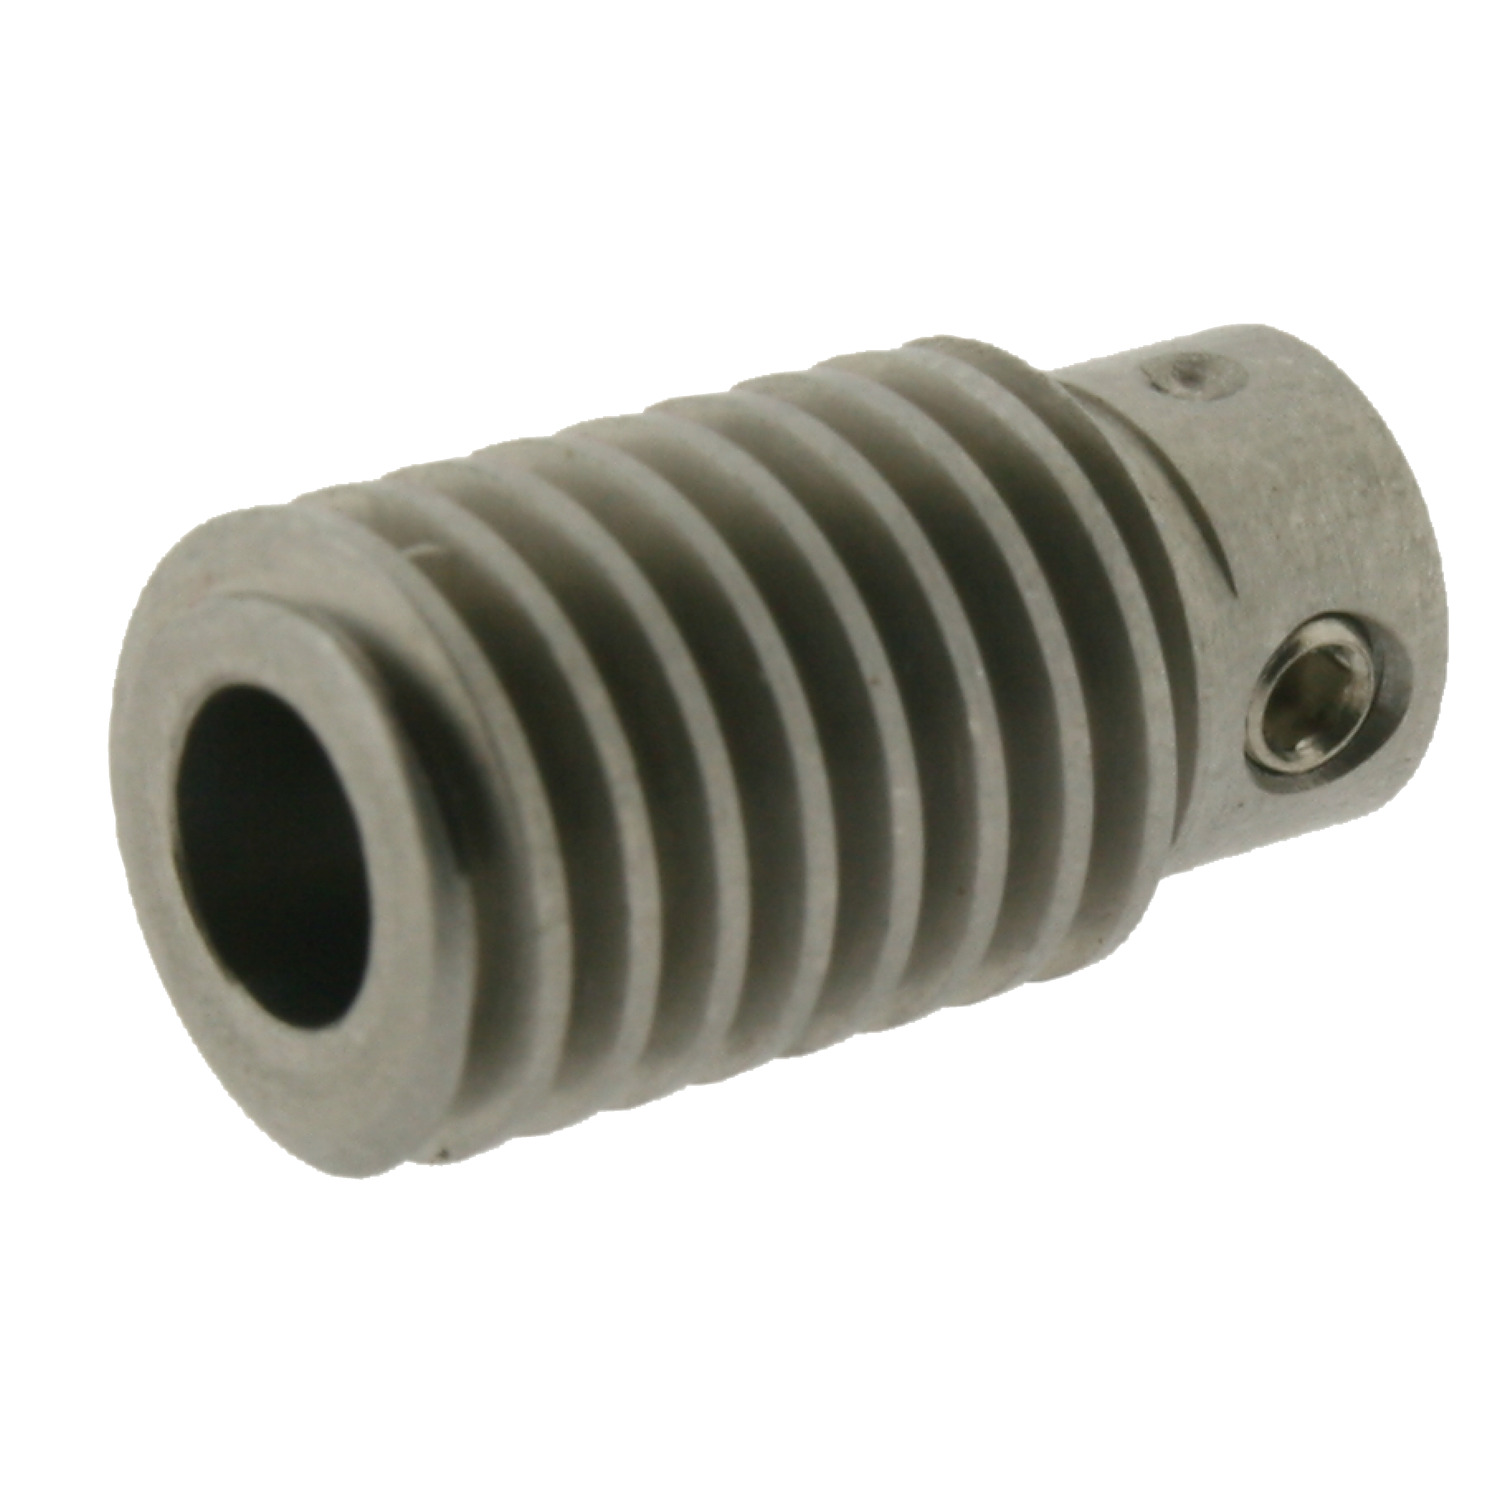 Product R2149, Precision Worms - Module 0,4 stainless steel / 